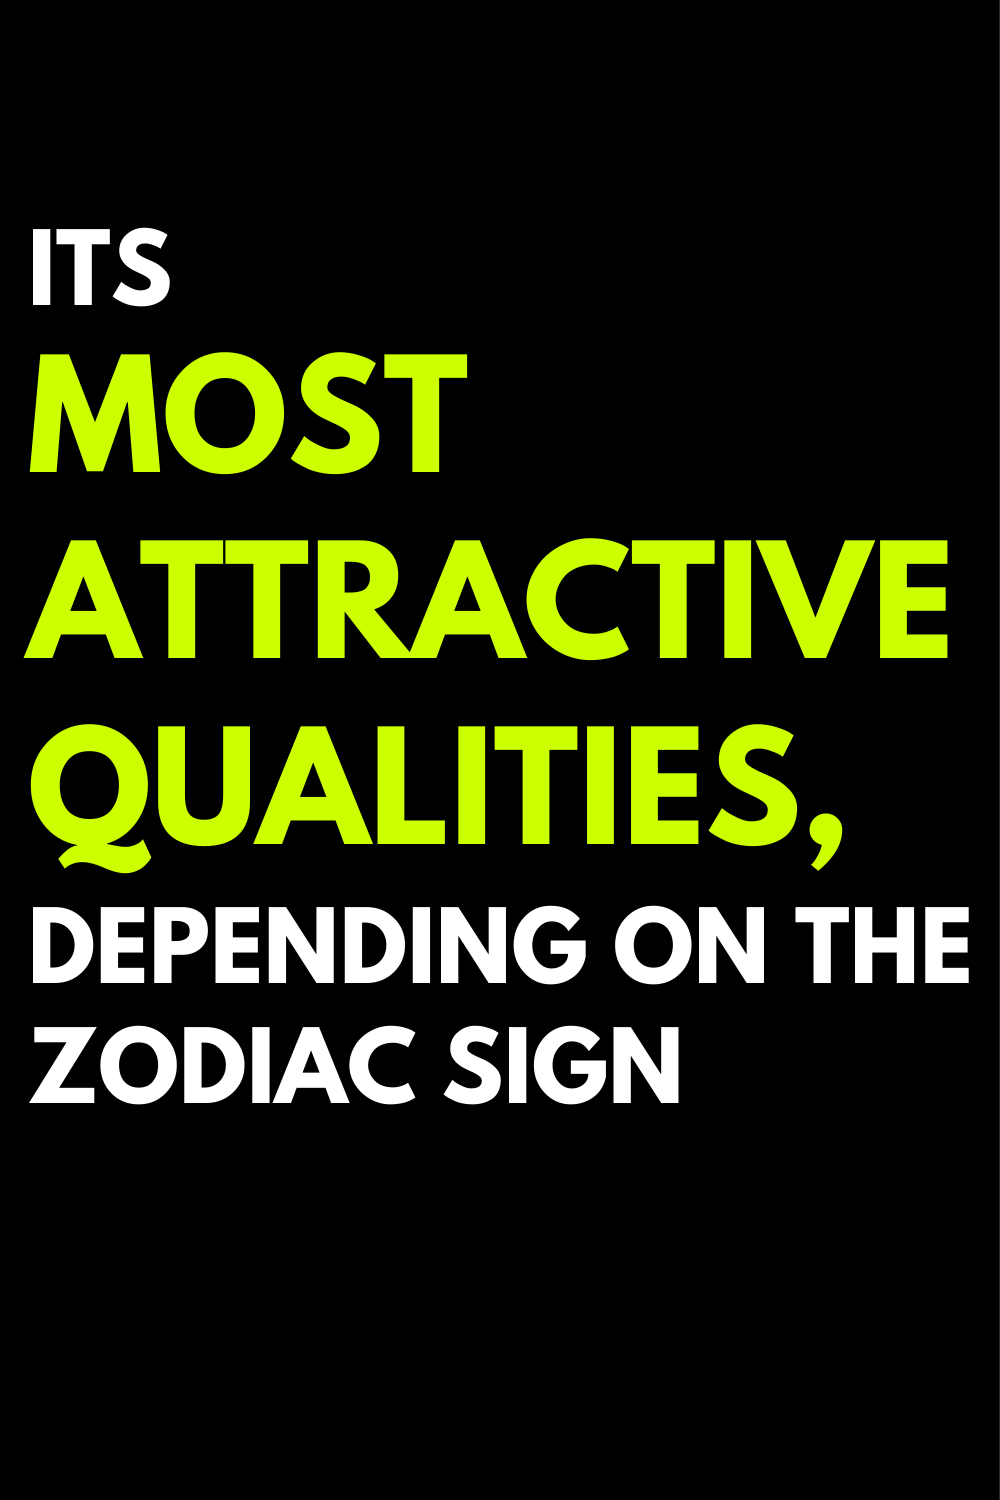 Its most attractive qualities, depending on the zodiac sign